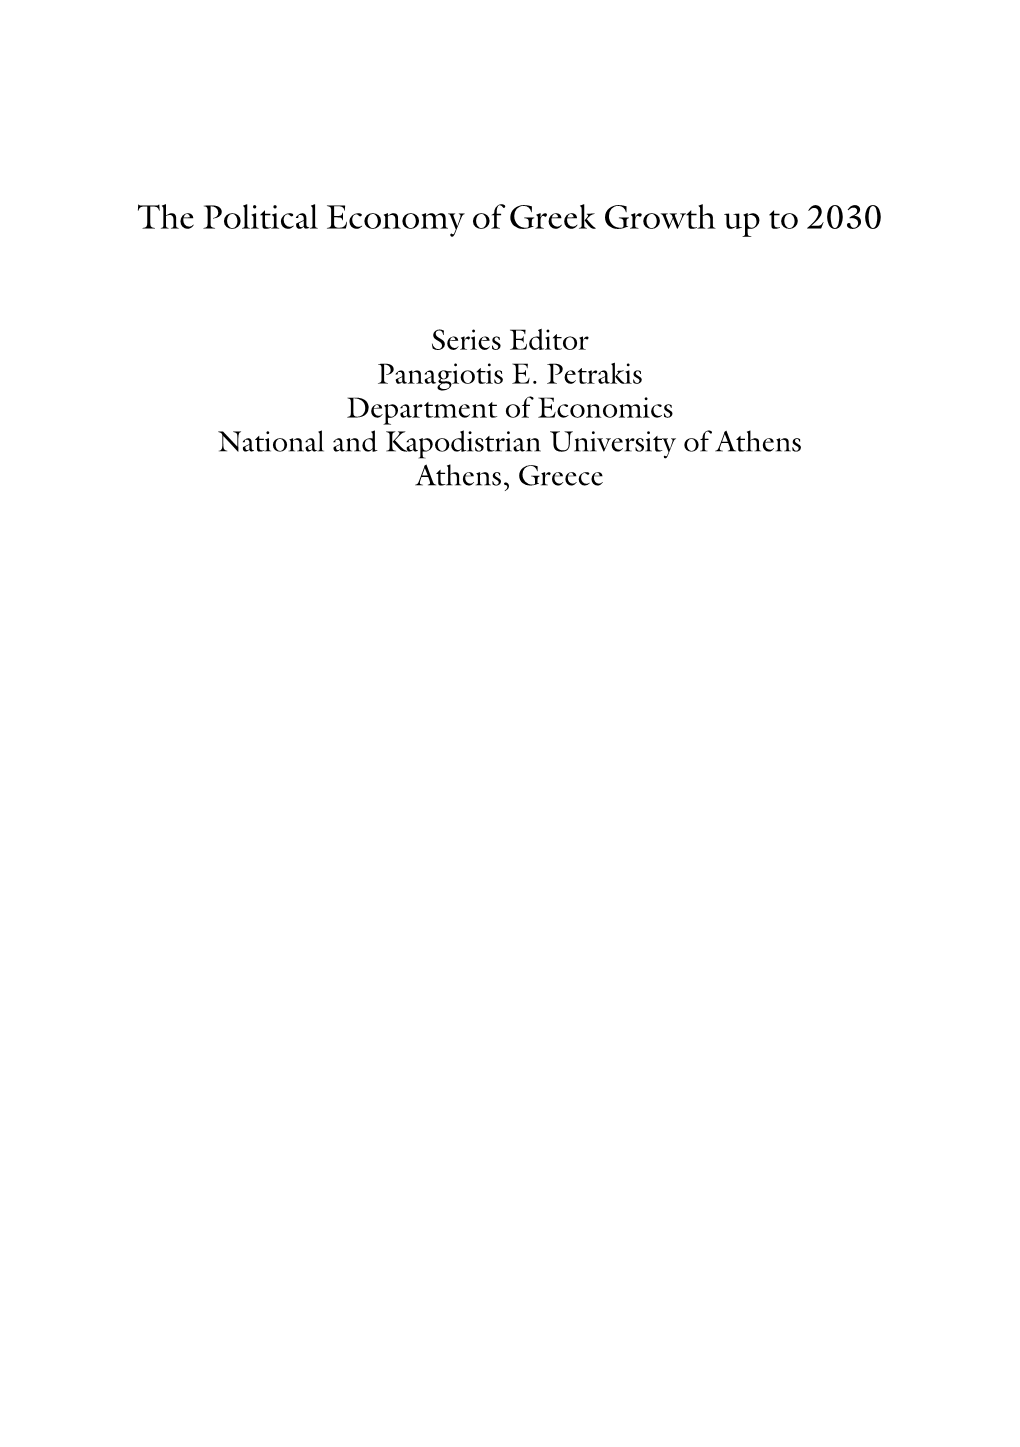 The Political Economy of Greek Growth up to 2030